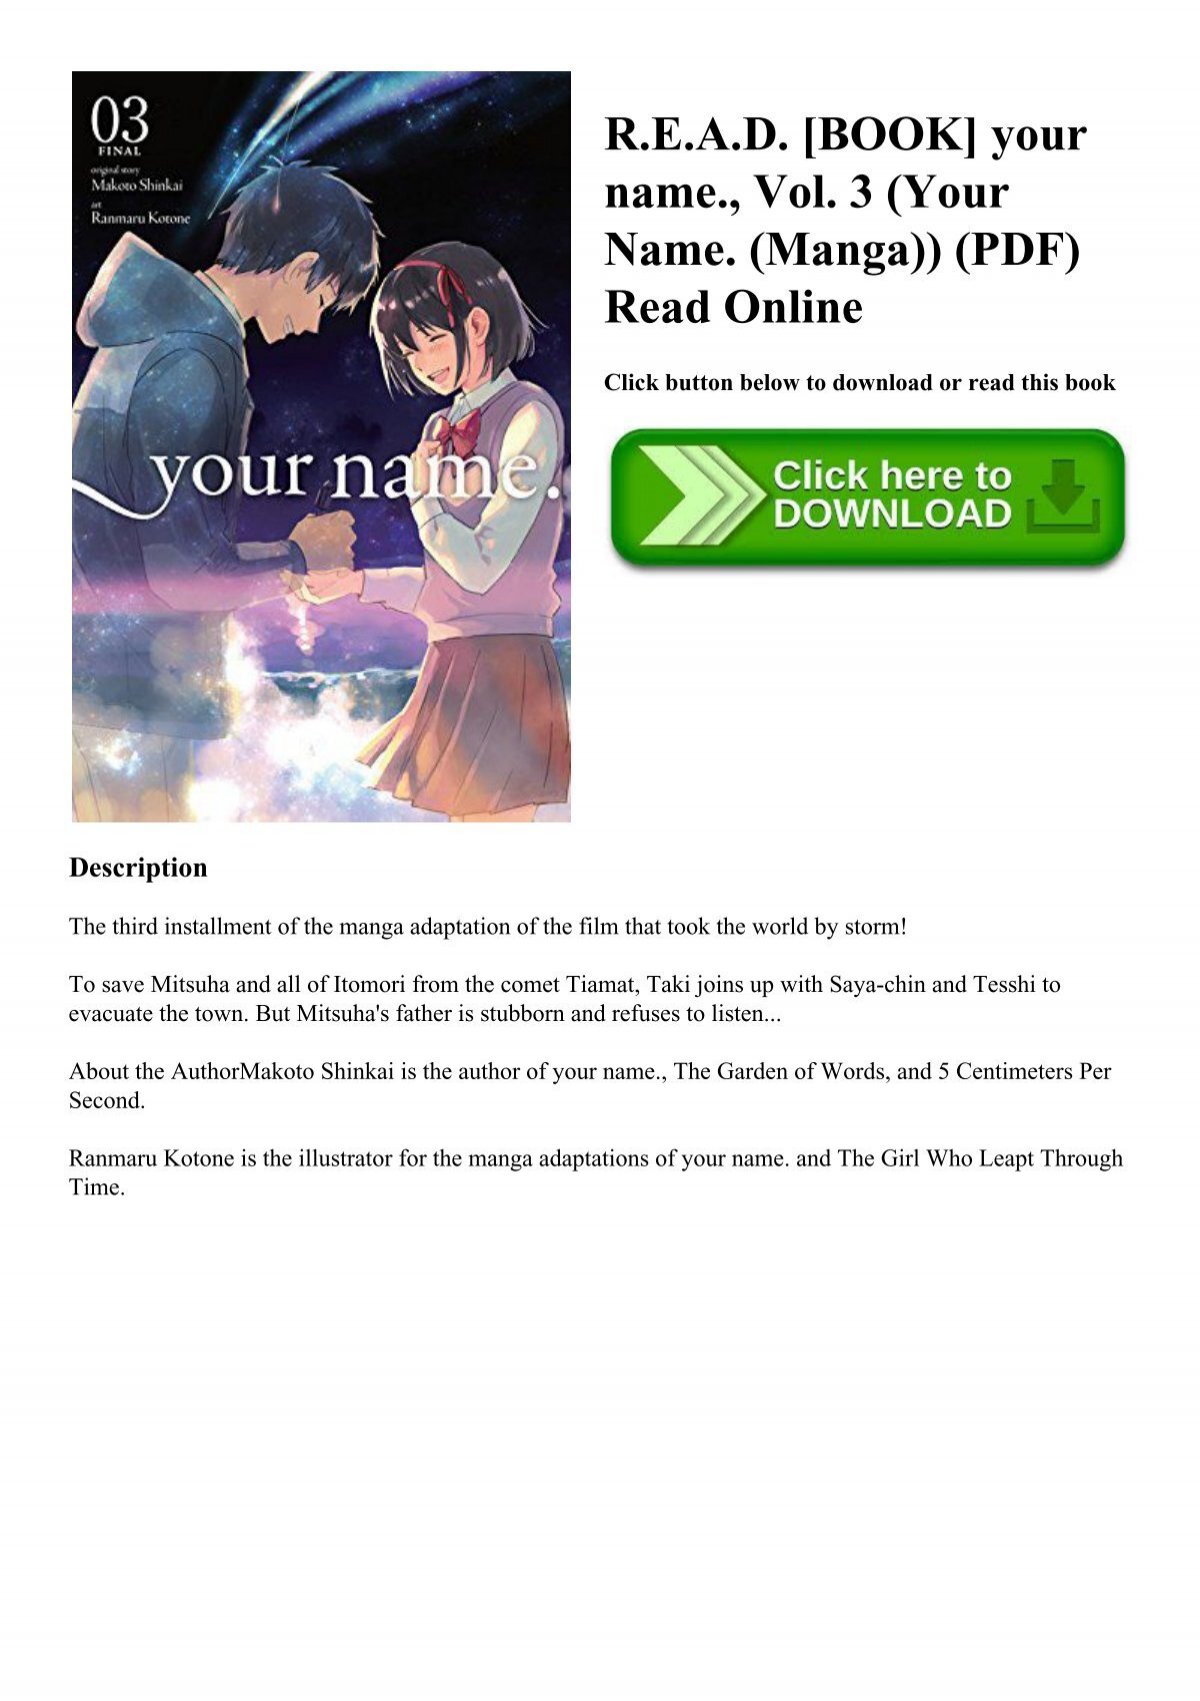 Your name vol 3